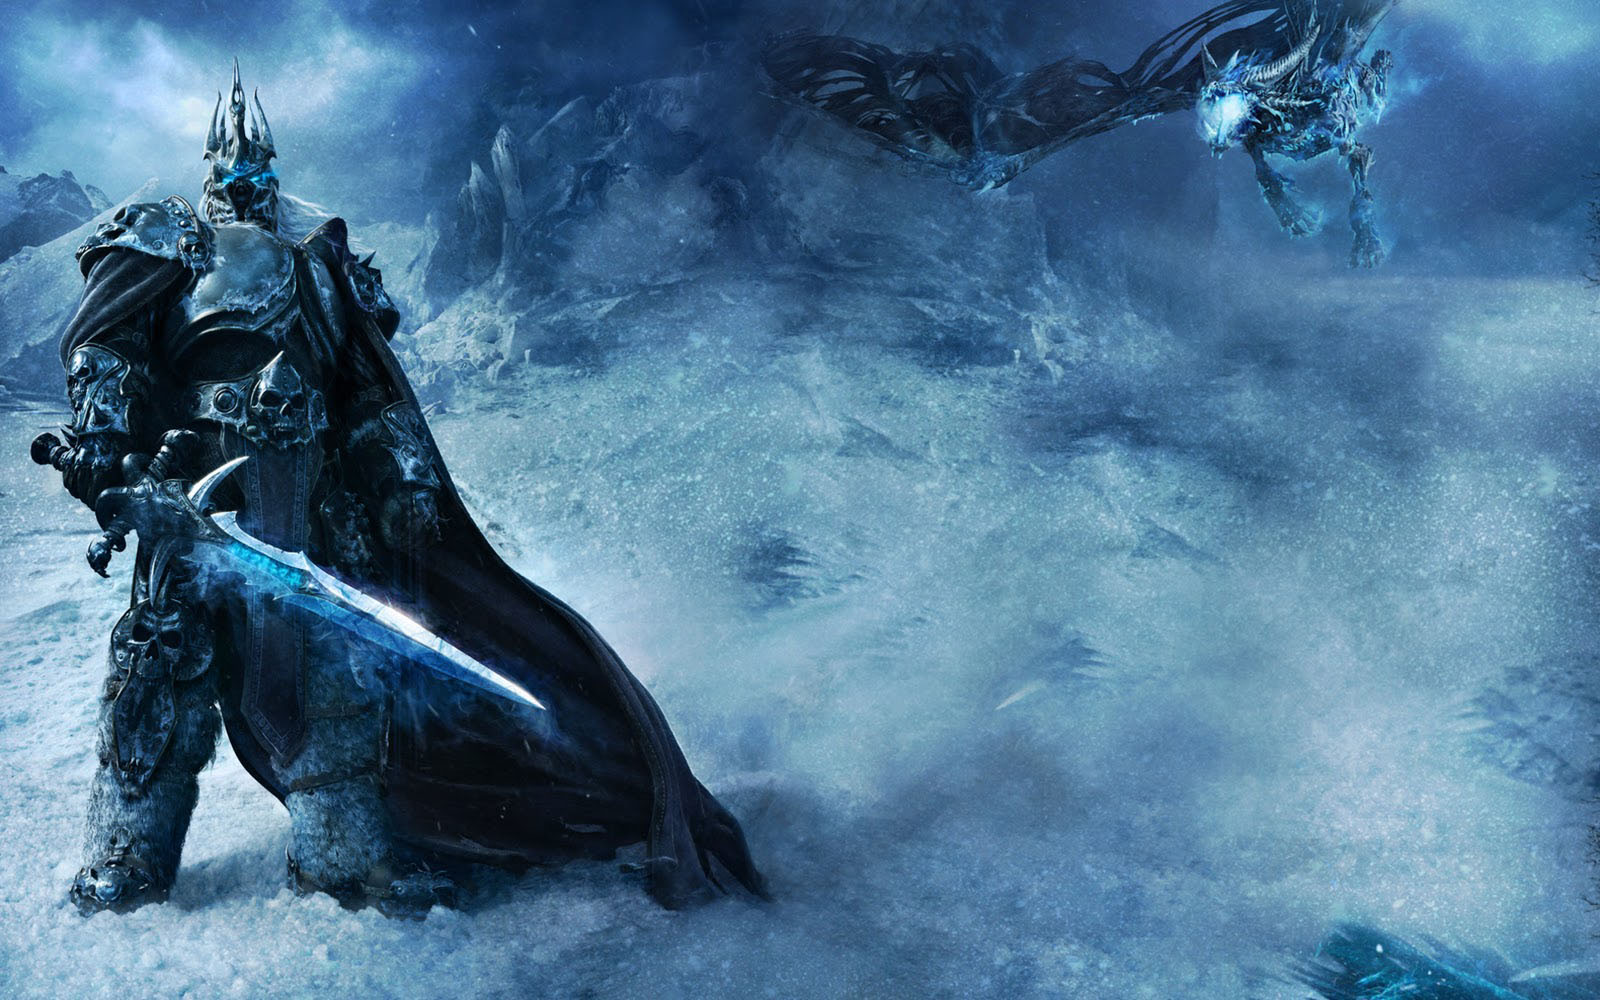 The Lich King Amp Sindragosa Frost Wyrm World Of